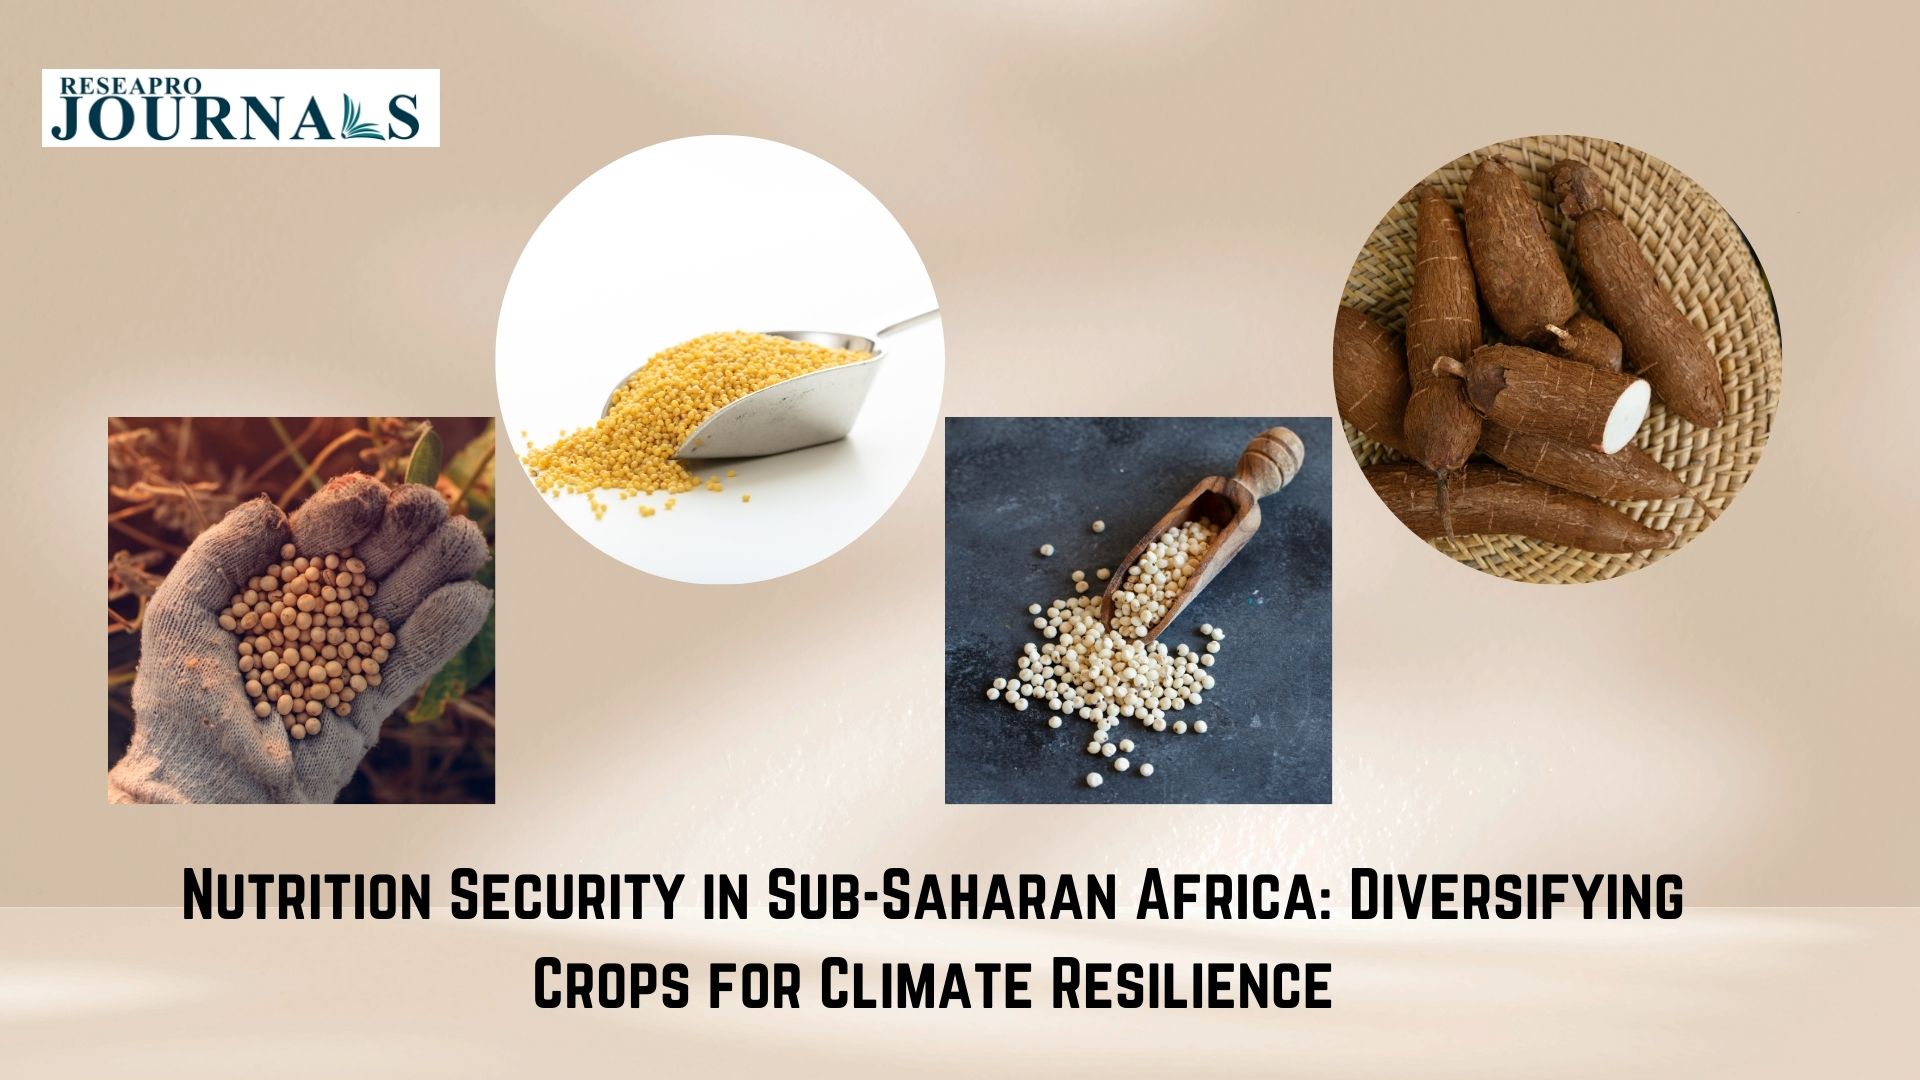 Nutrition Security in Sub-Saharan Africa: Diversifying Crops for Climate Resilience